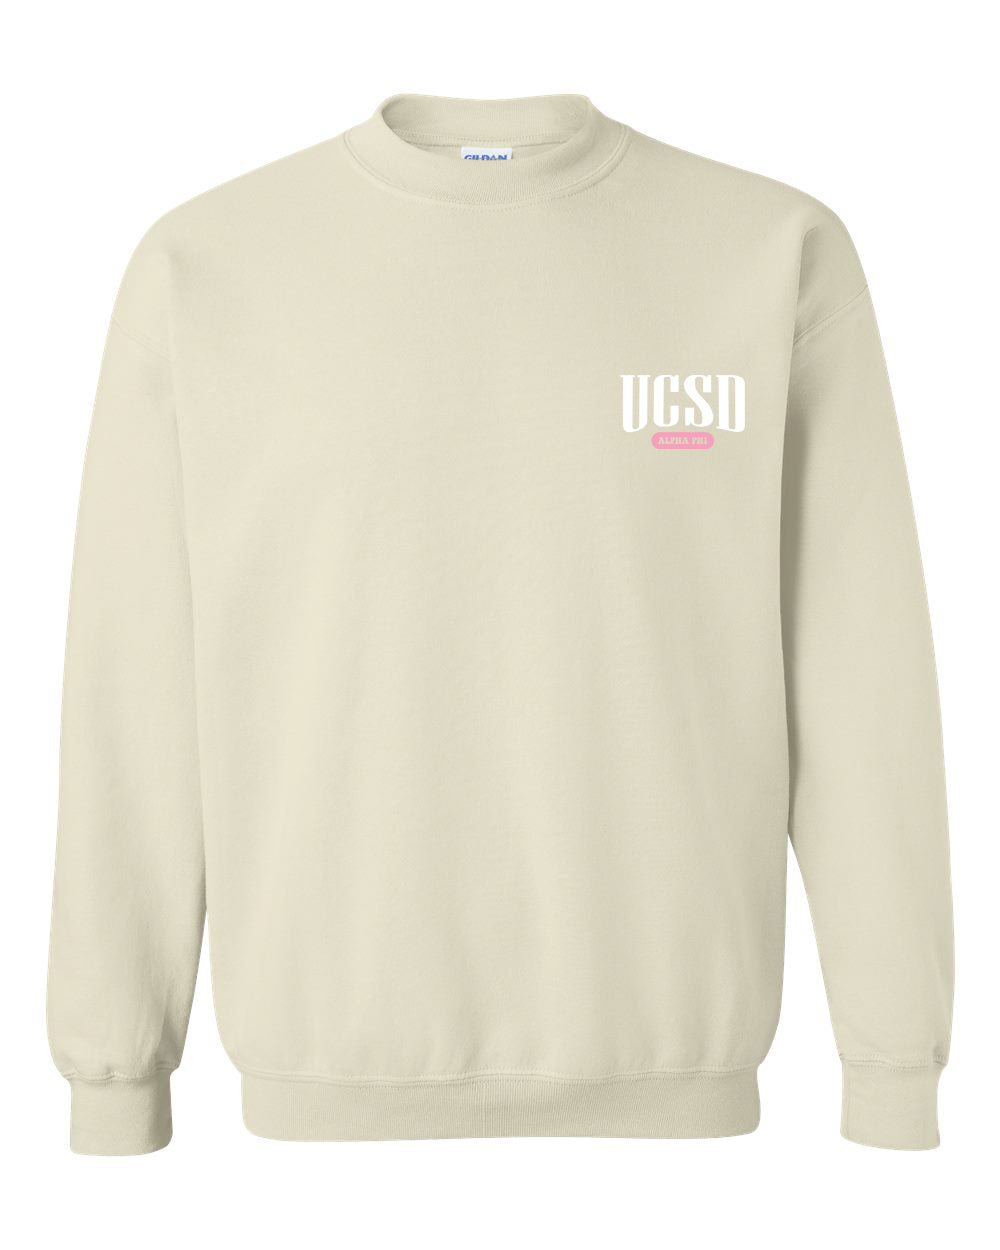 a white sweatshirt with the words usssd on it